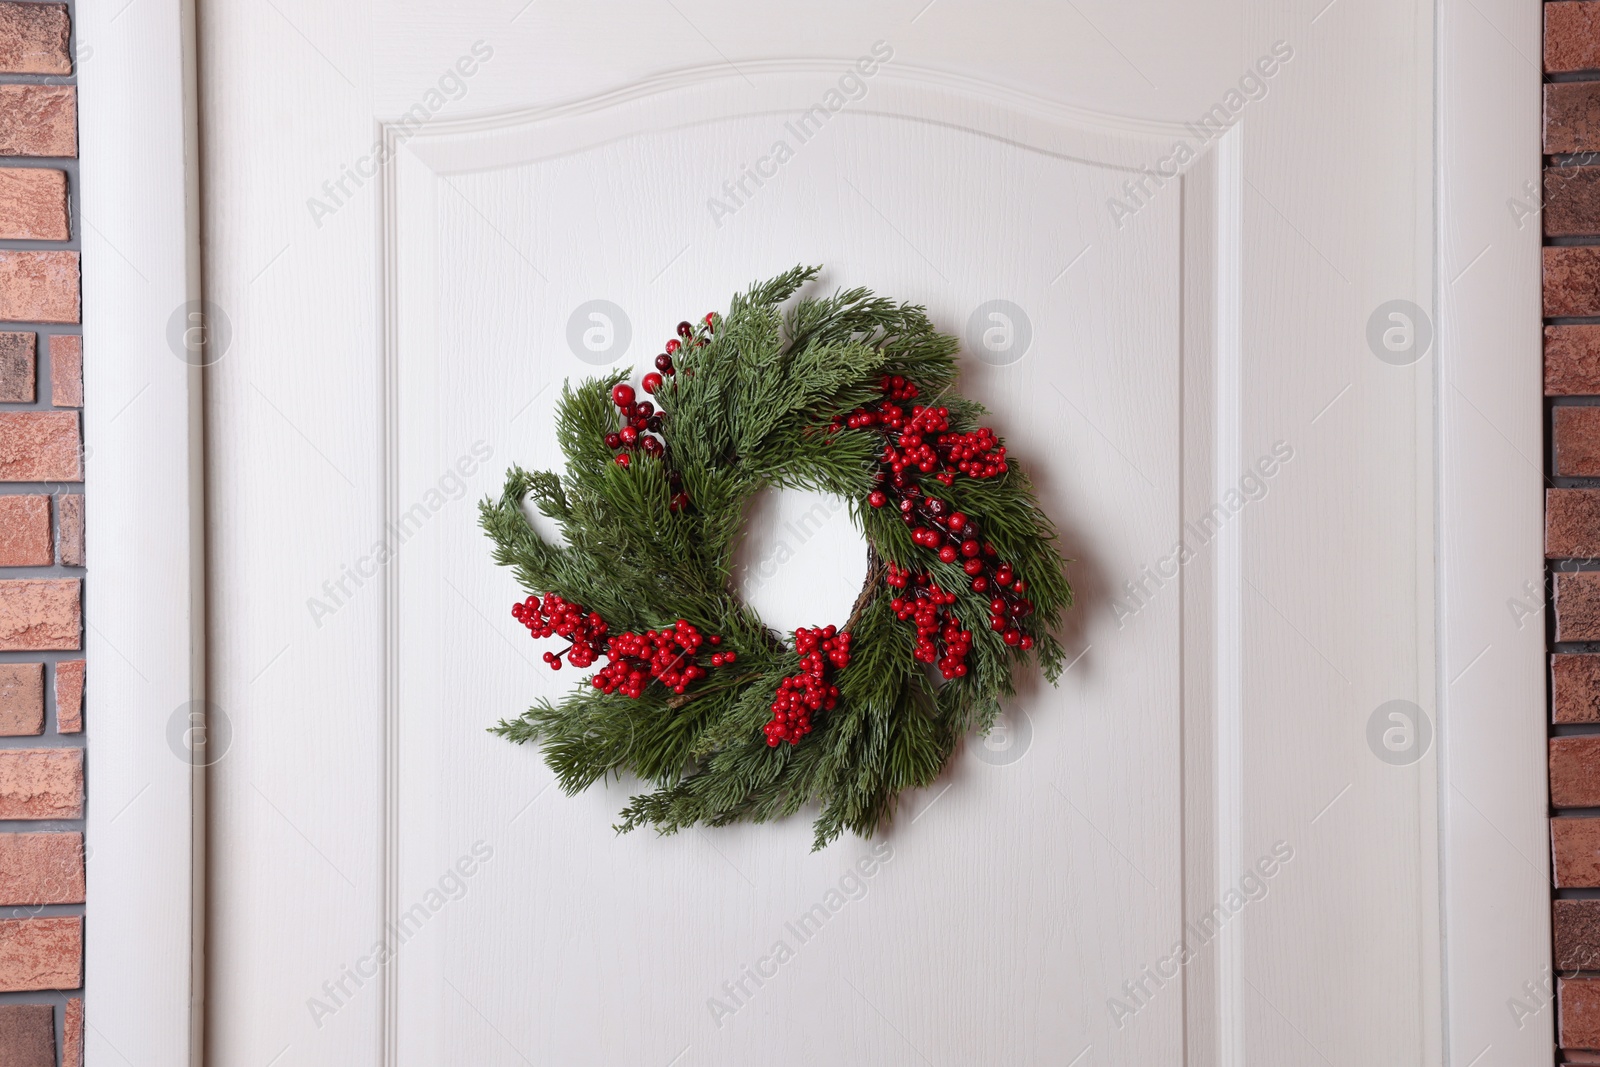 Photo of Beautiful Christmas wreath with red berries hanging on white door